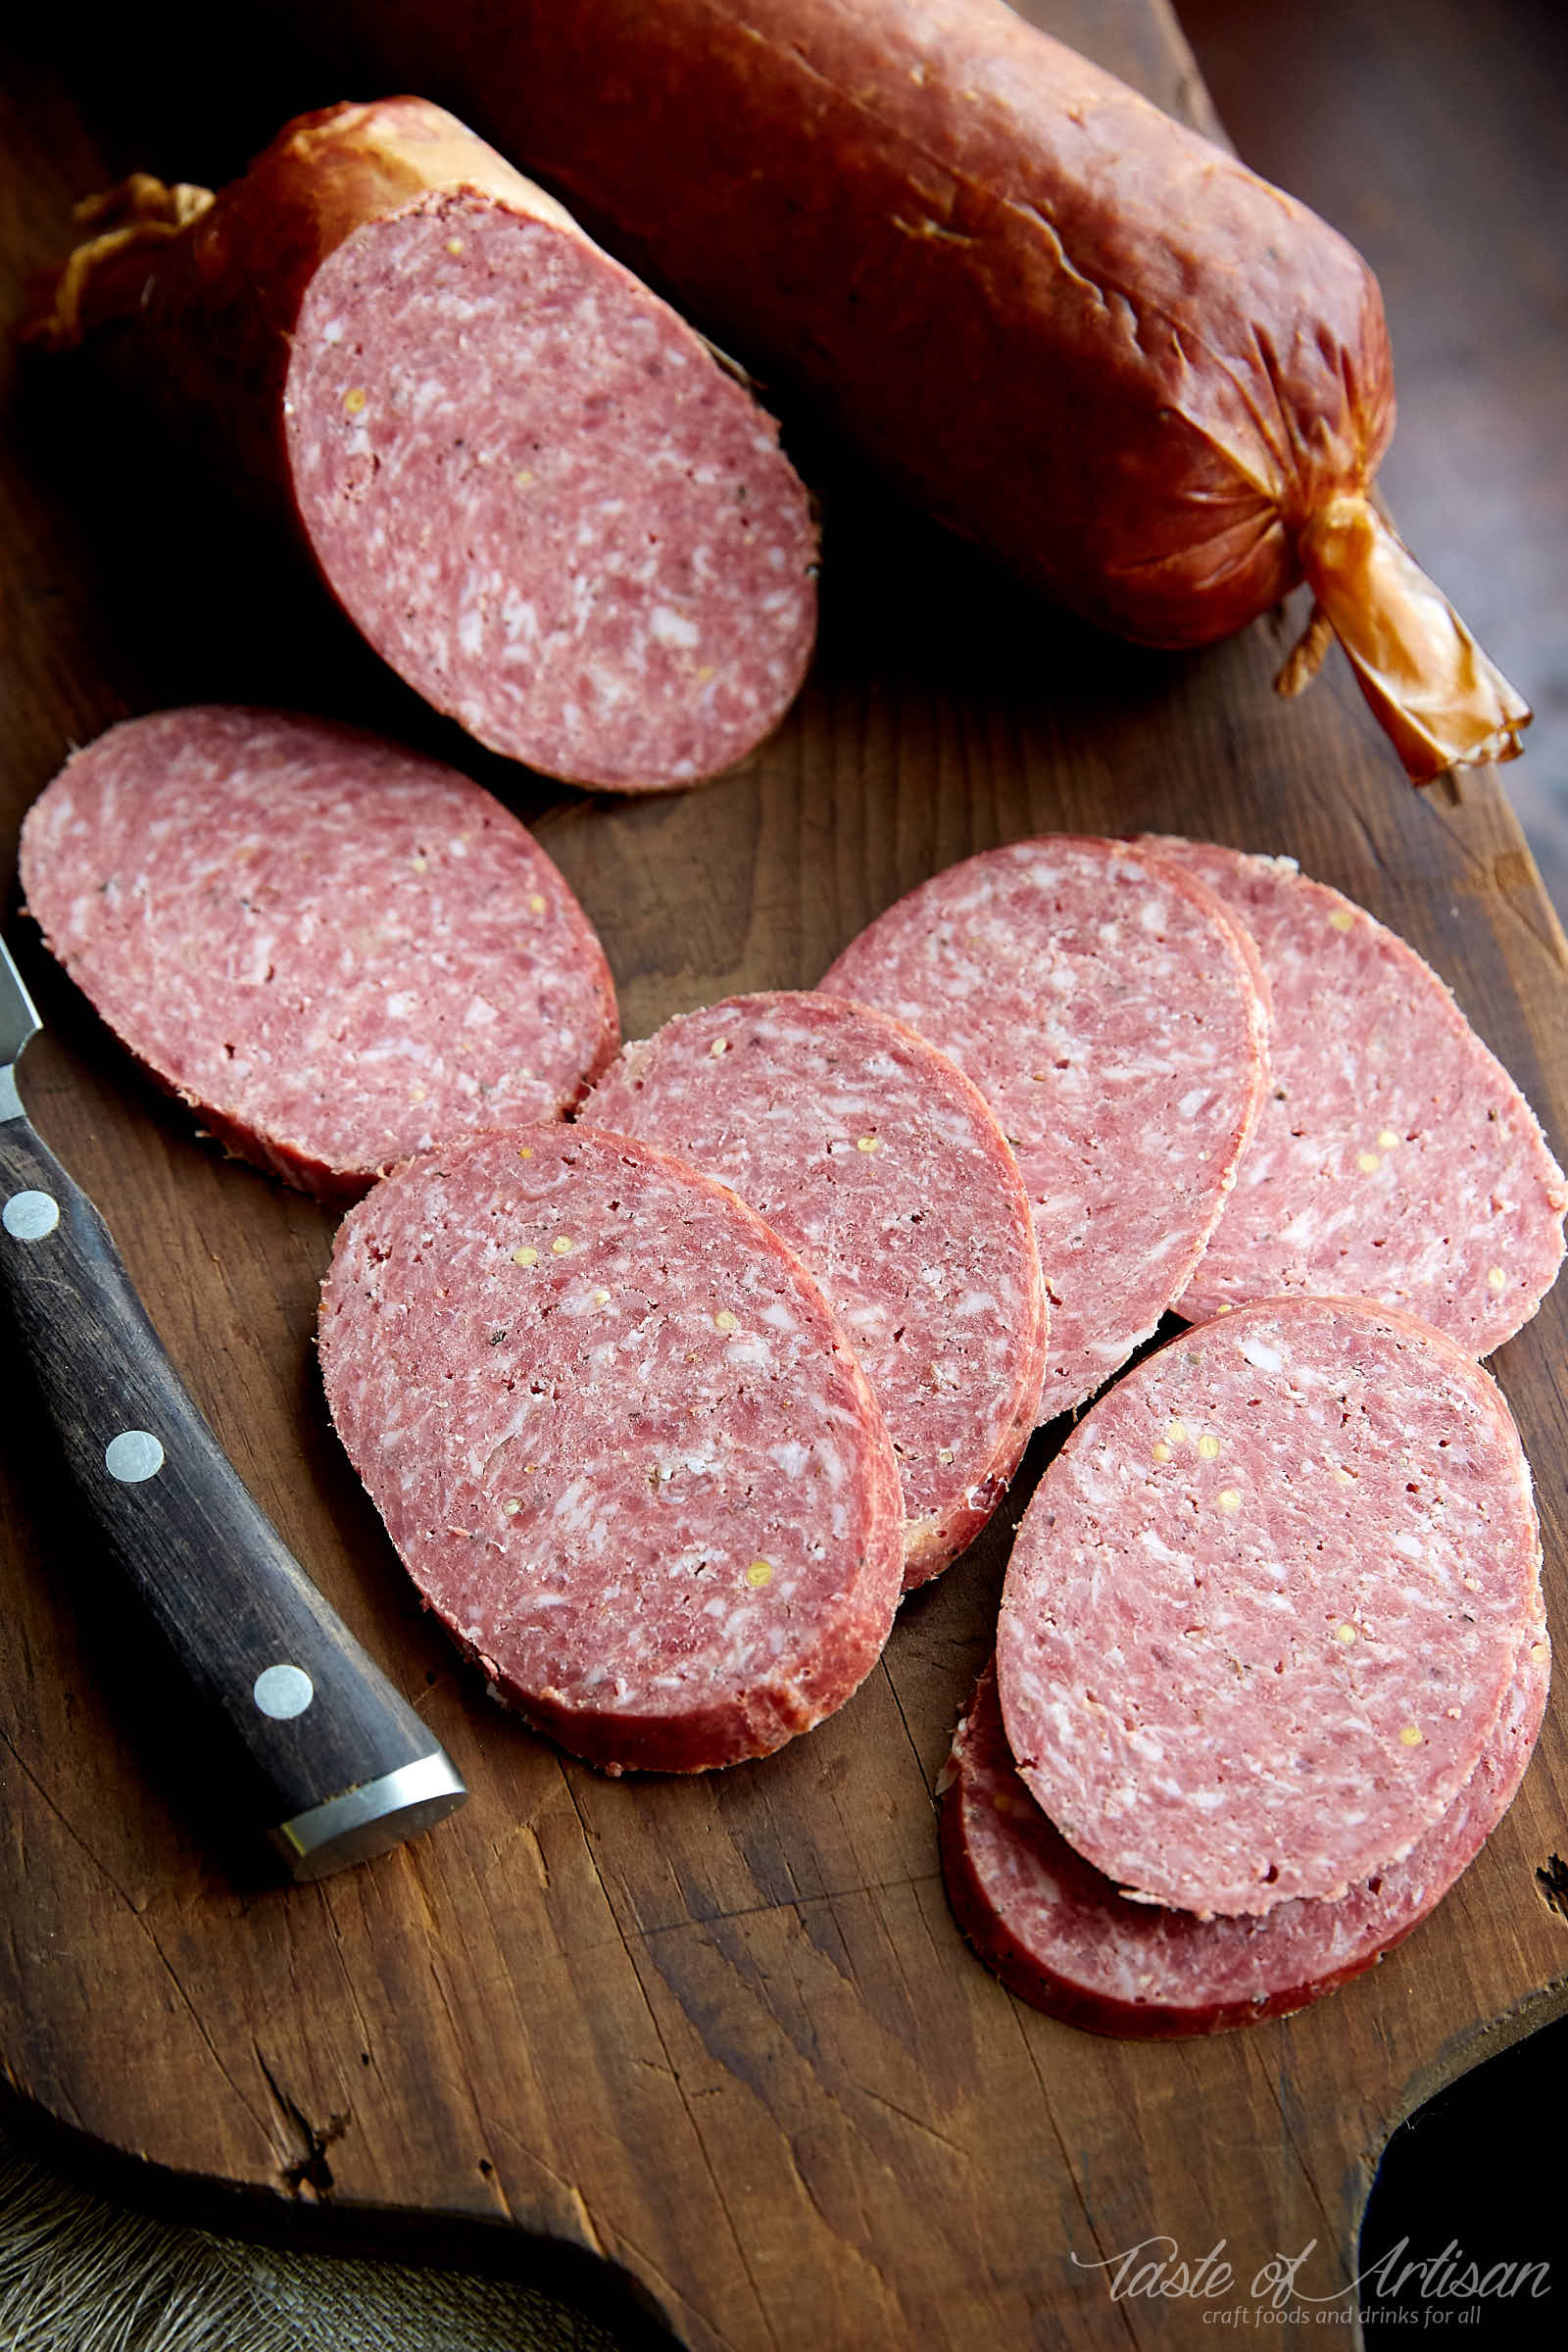 Learn how to make summer sausage at home with these easy to follow illustrated instructions. The best summer sausage recipe.| Taste of Artisan